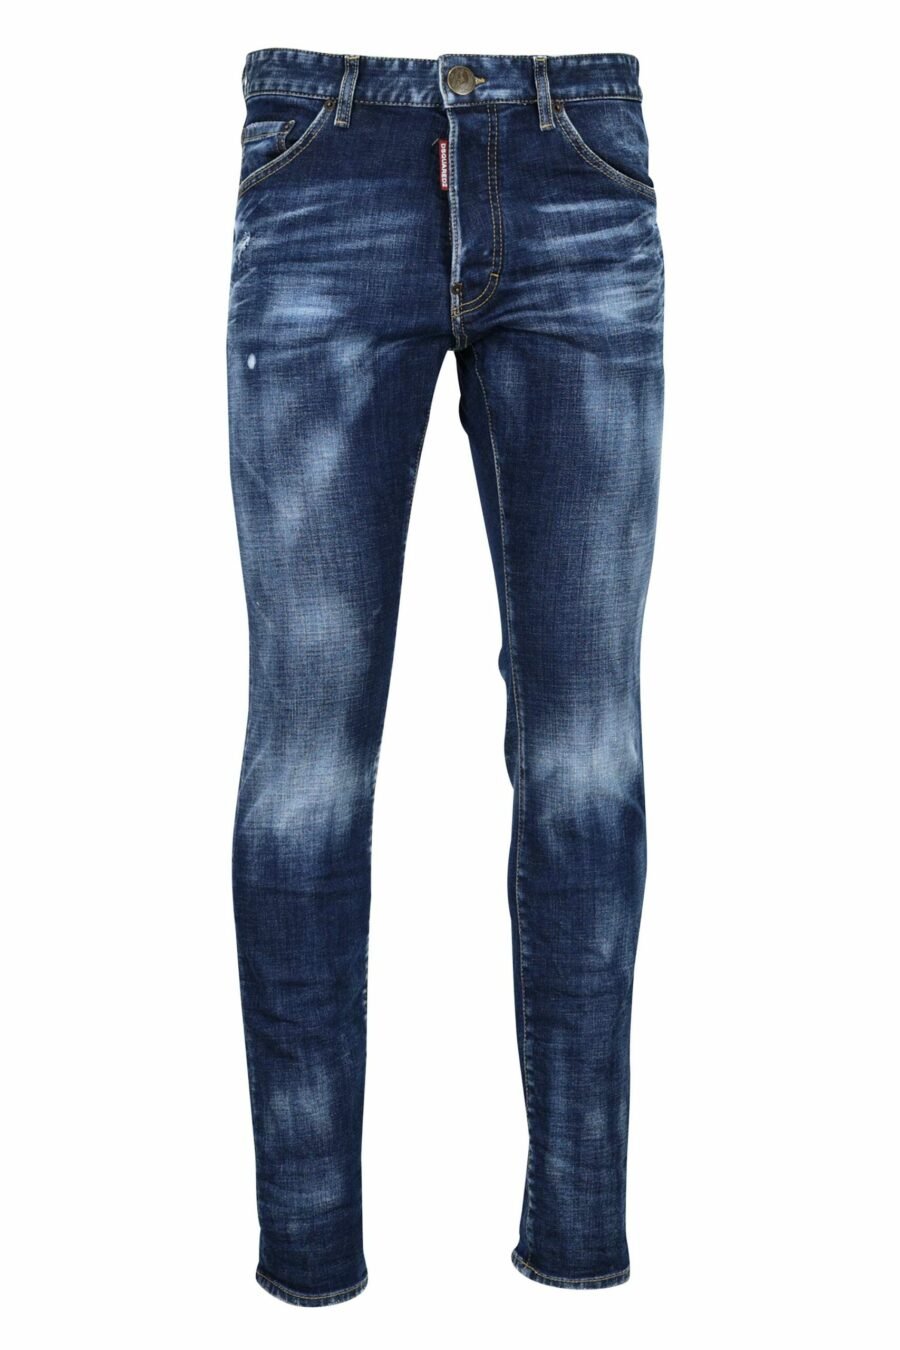 Cool guy jean trousers blue frayed - 8052134970072 scaled